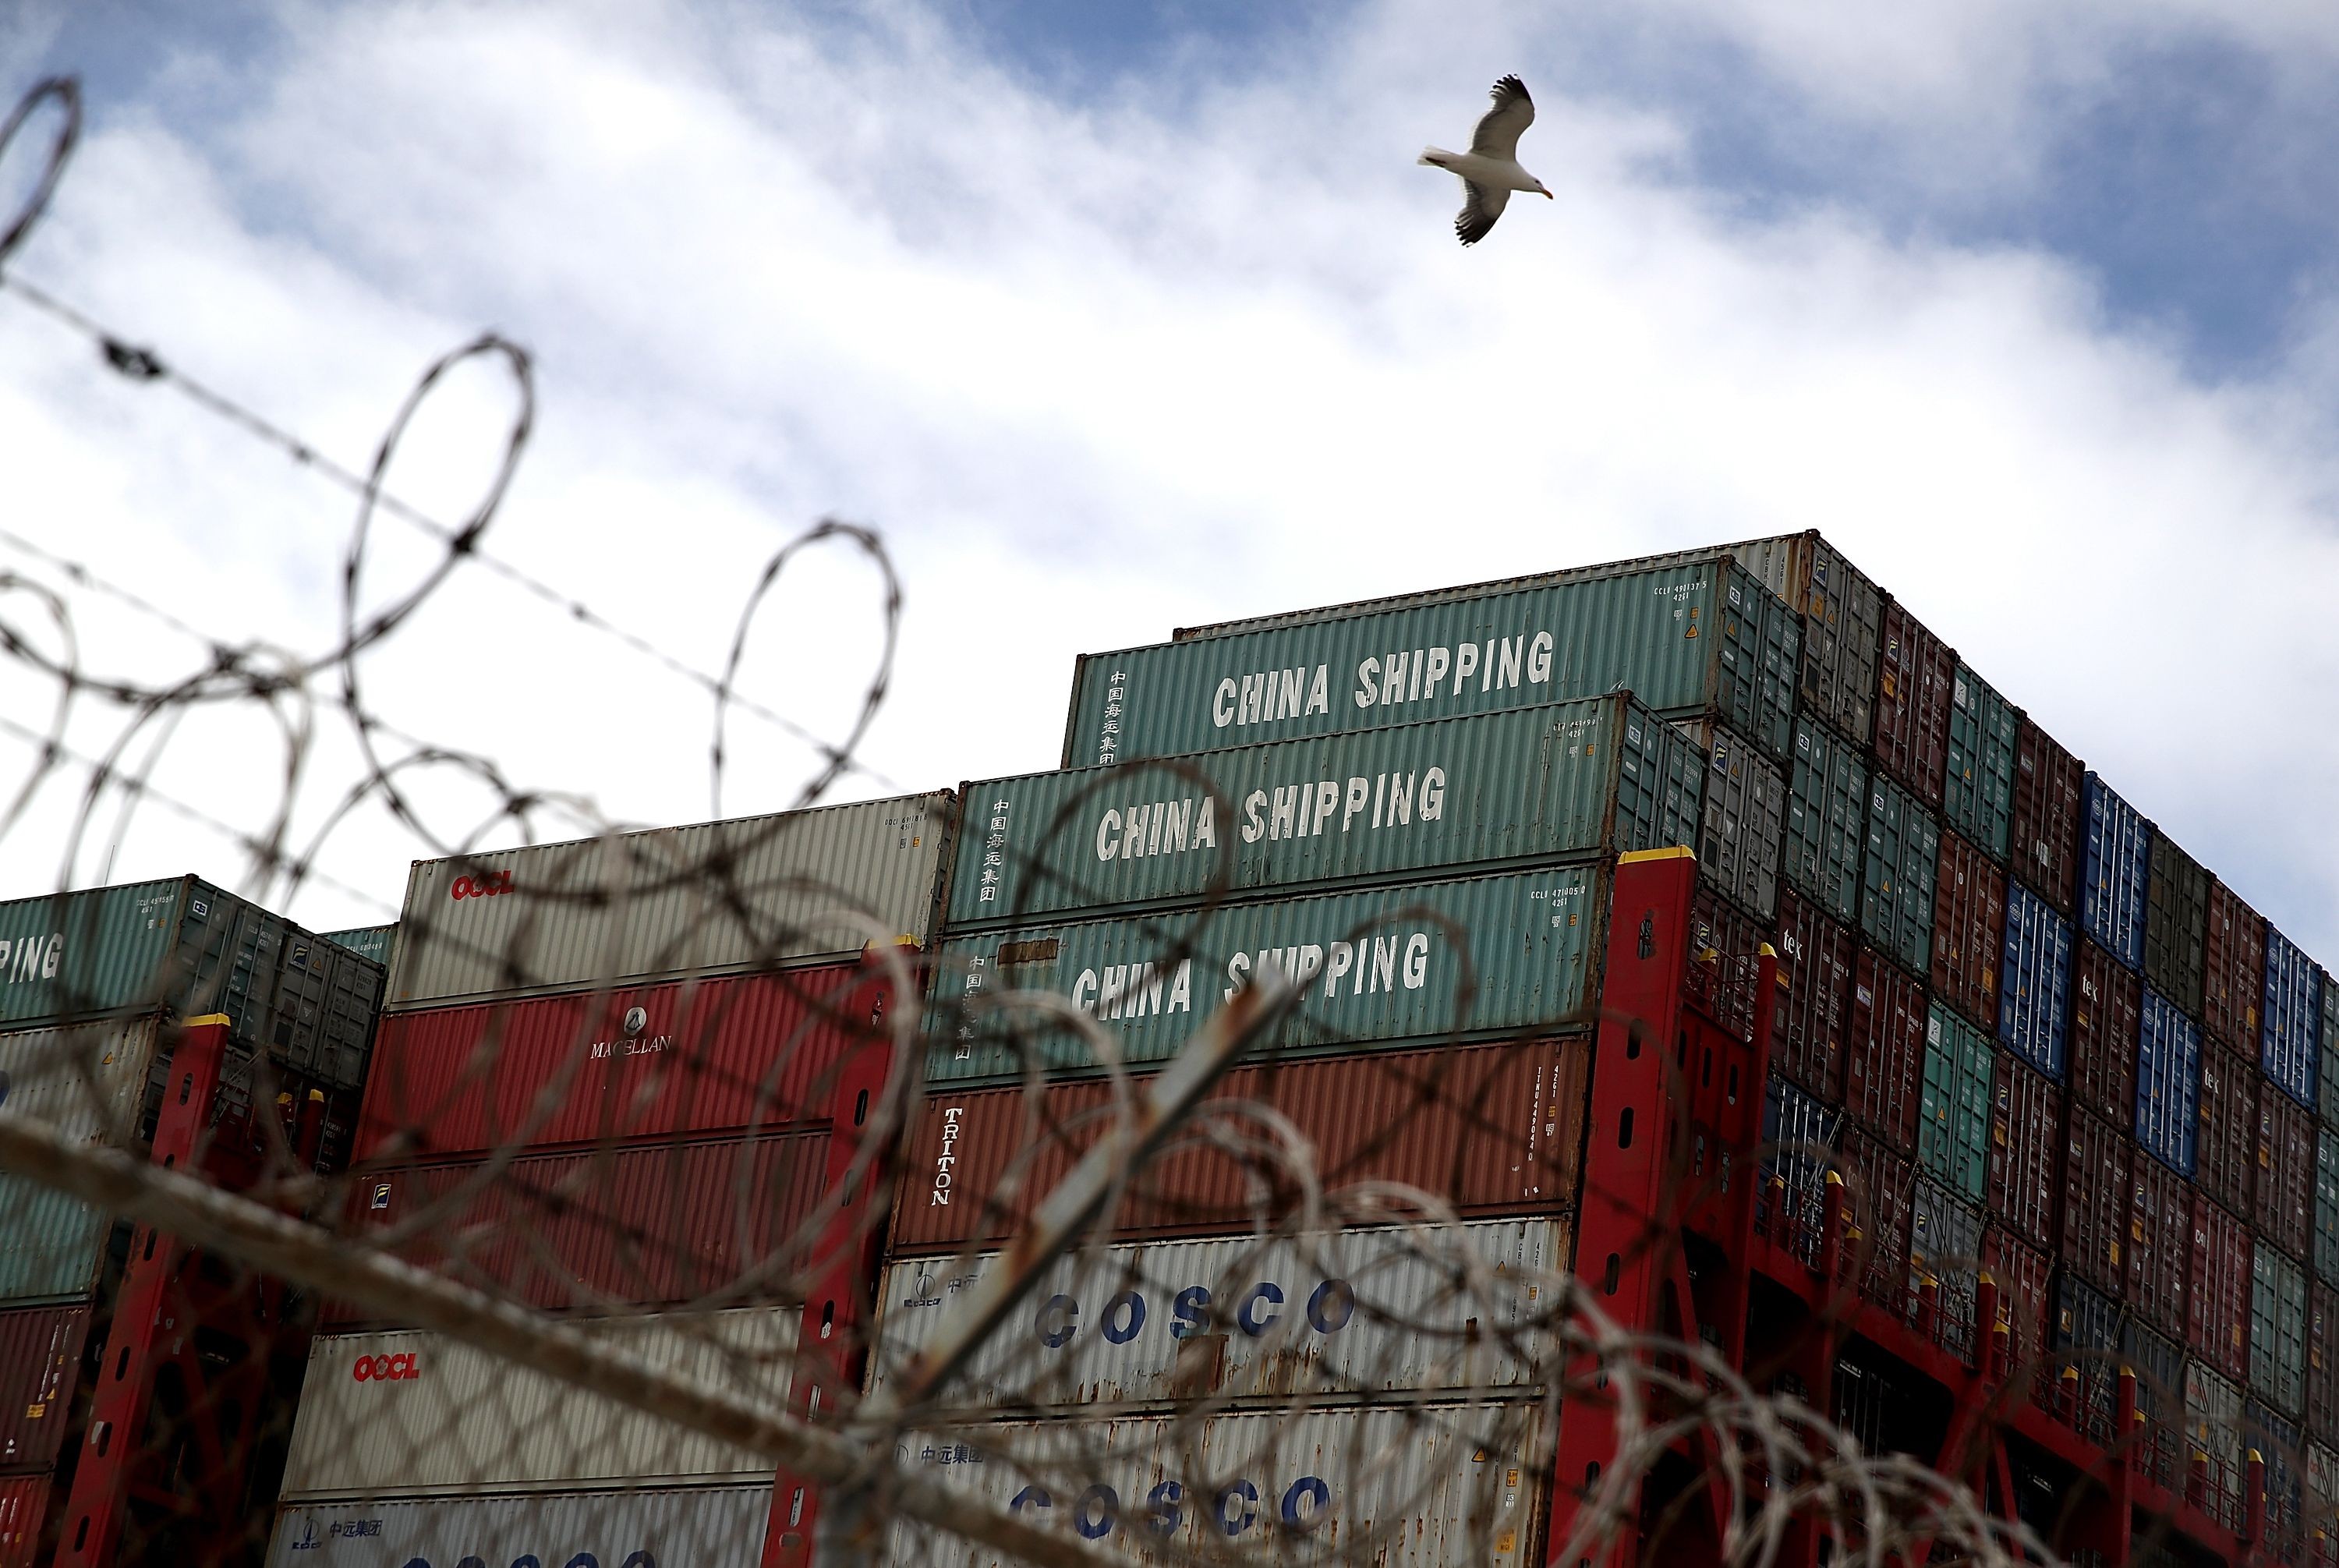 Containers on the CSCL East China Sea container ship at the Port of Oakland last month. The US and China imposed tit-for-tat tariffs on a variety of goods in the first shot in a trade war. Photo: AFP